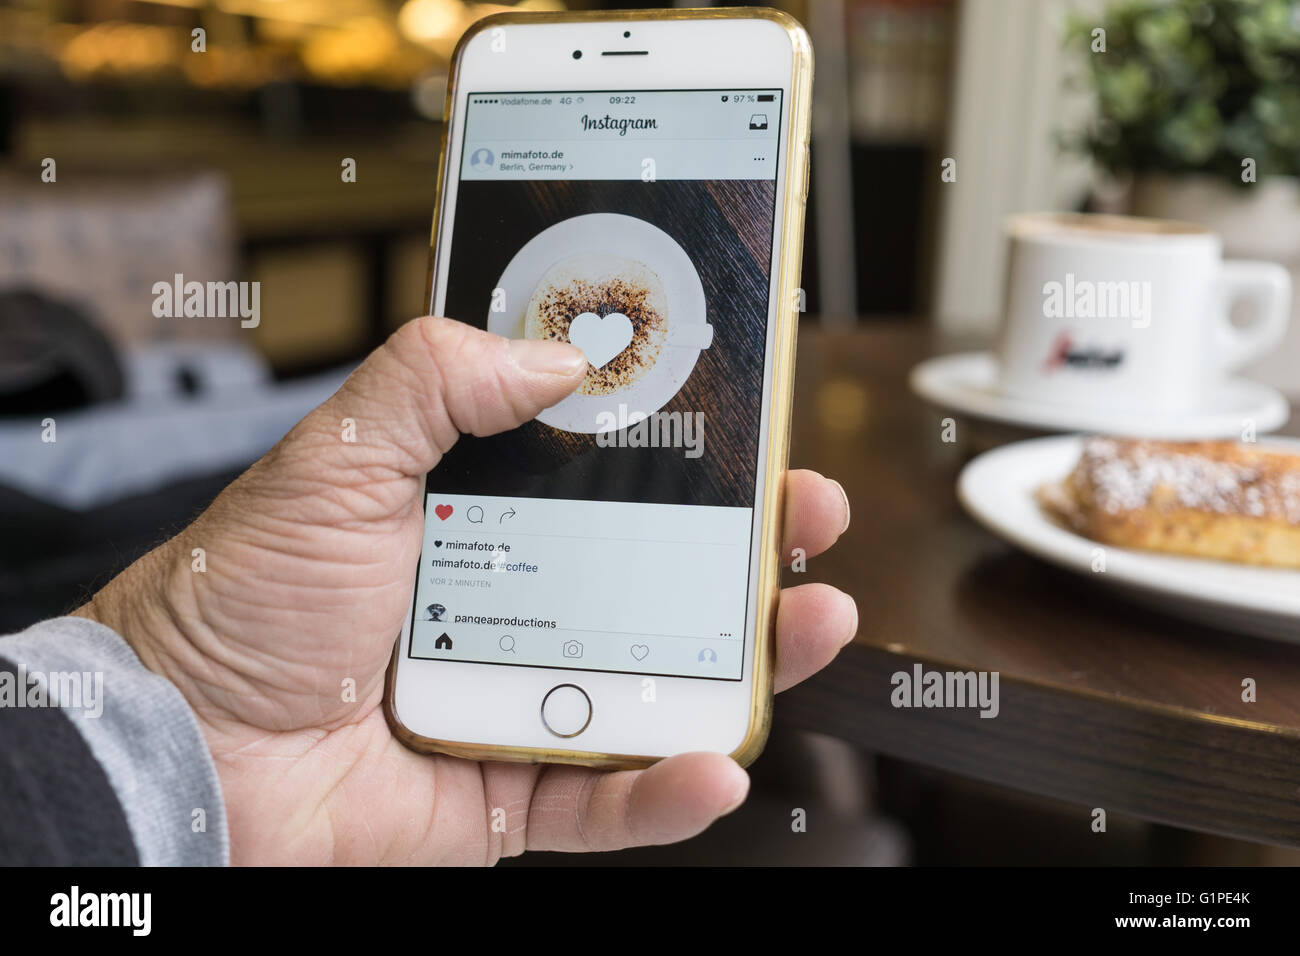 BERLIN, GERMANY - MAY 17, 2016: Man using the newly designed Instagram app on his iPhone 6 Plus. Stock Photo